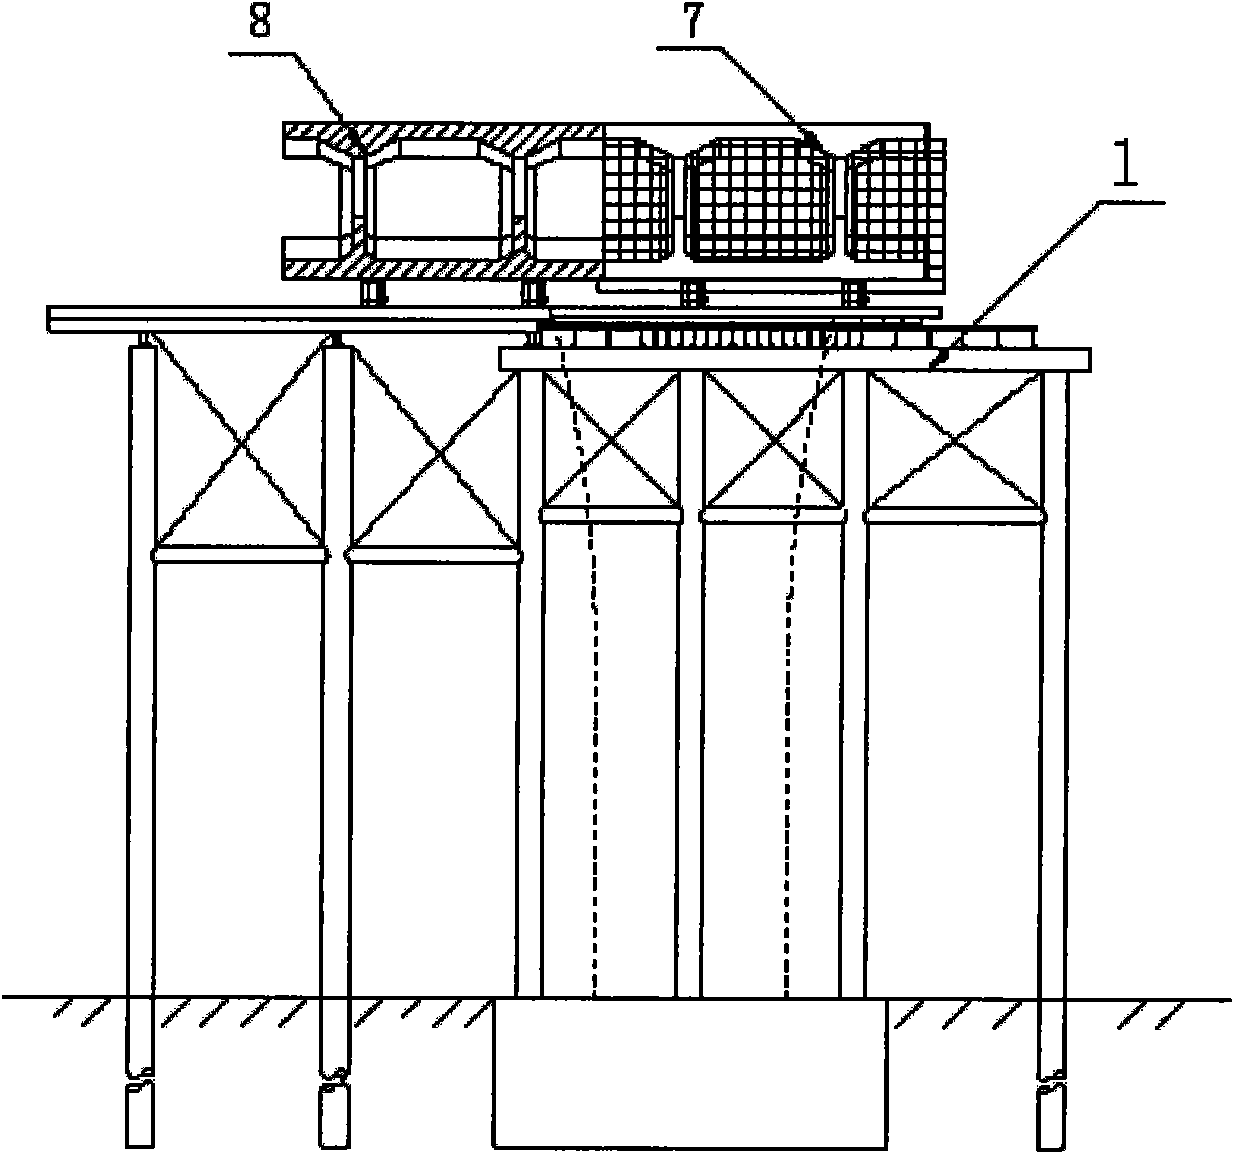 Construction method for high-altitude section prefabricating, beam moving, beam storing and assembling of large concrete box beam